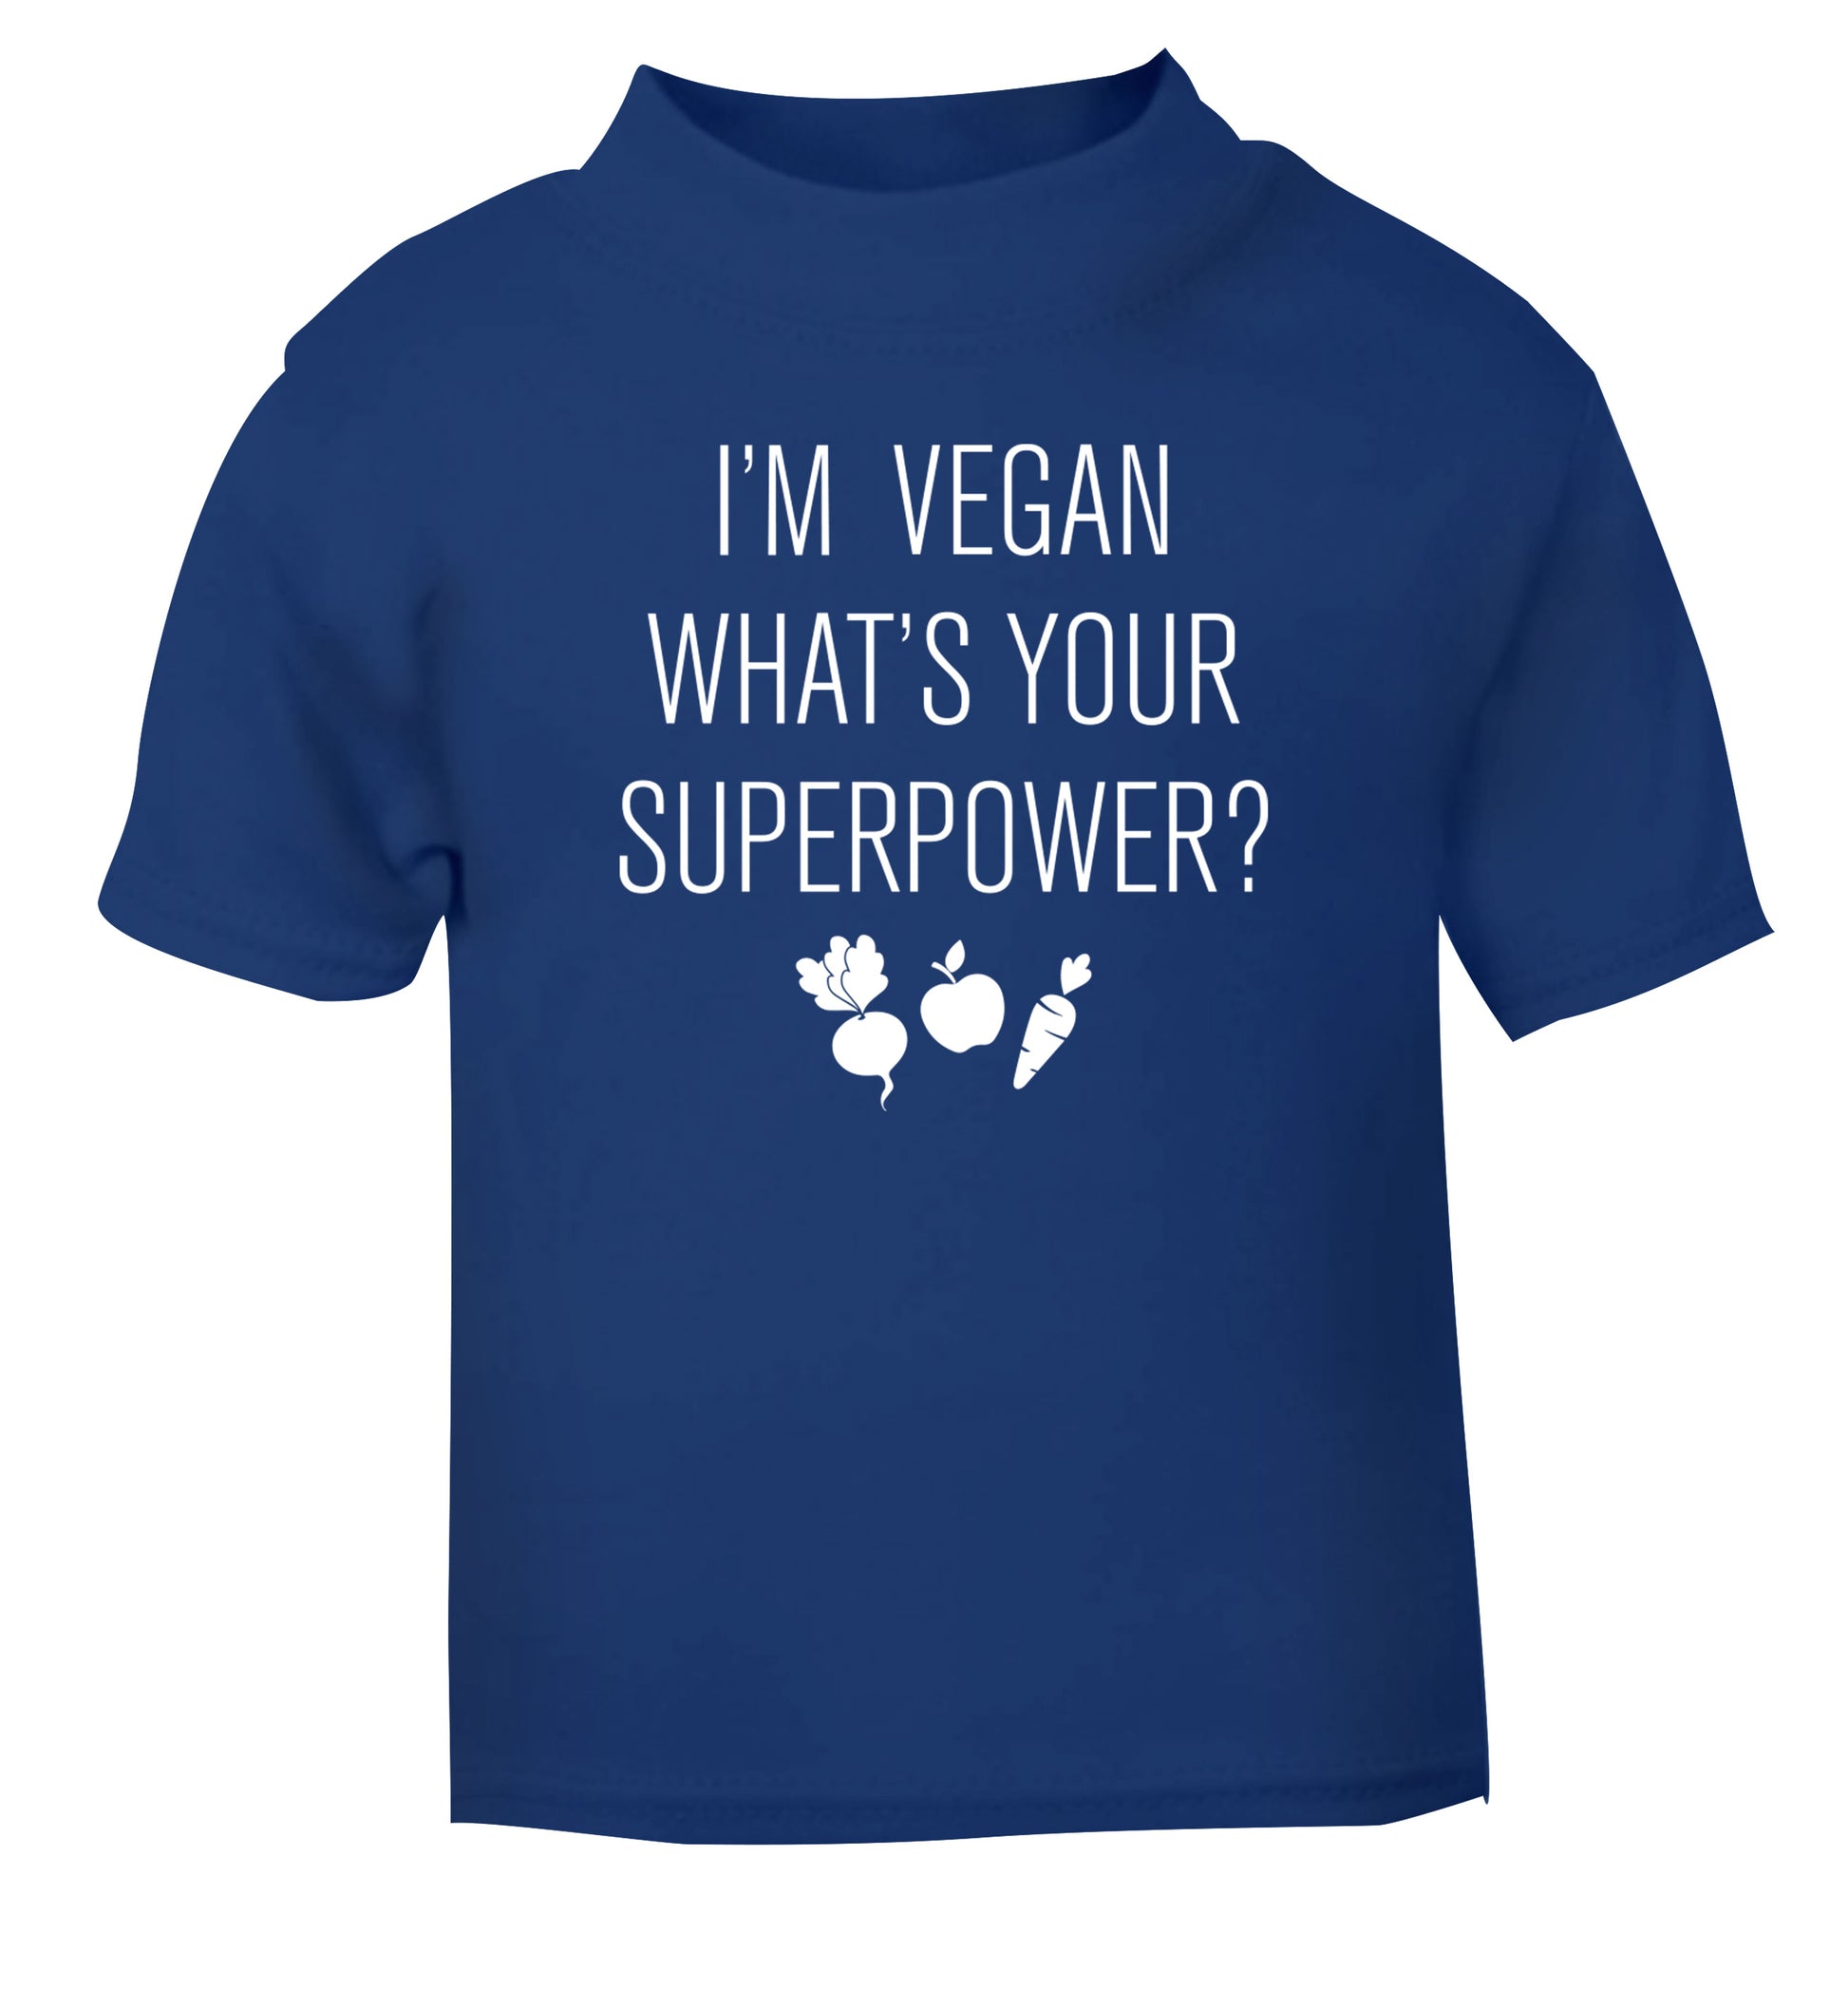 I'm Vegan What's Your Superpower? blue Baby Toddler Tshirt 2 Years